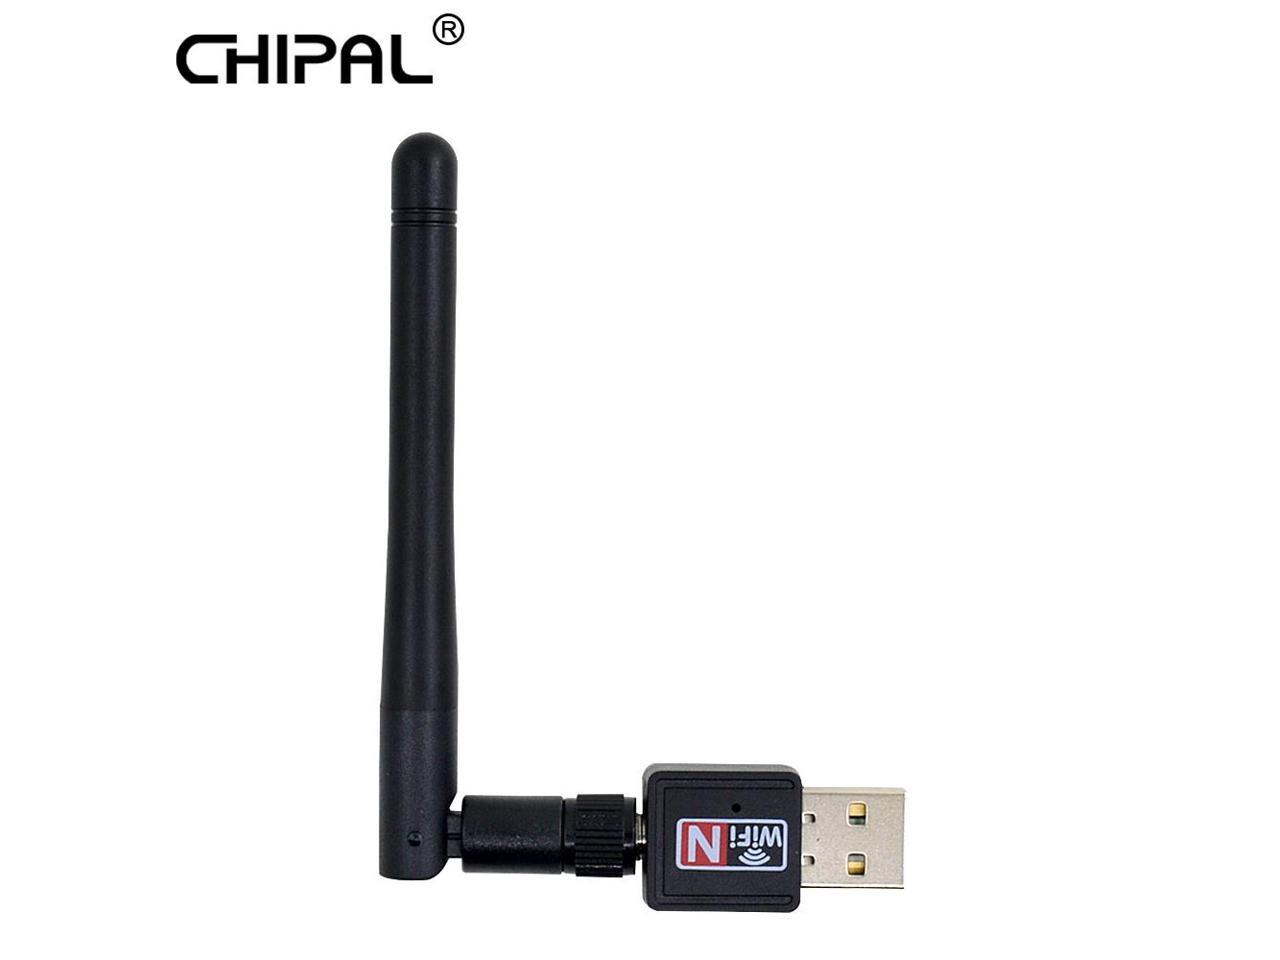 150Mbps USB 802.11n Wi-Fi Ethernet Wireless Adapter Card with 2dbi Antenna NEW 